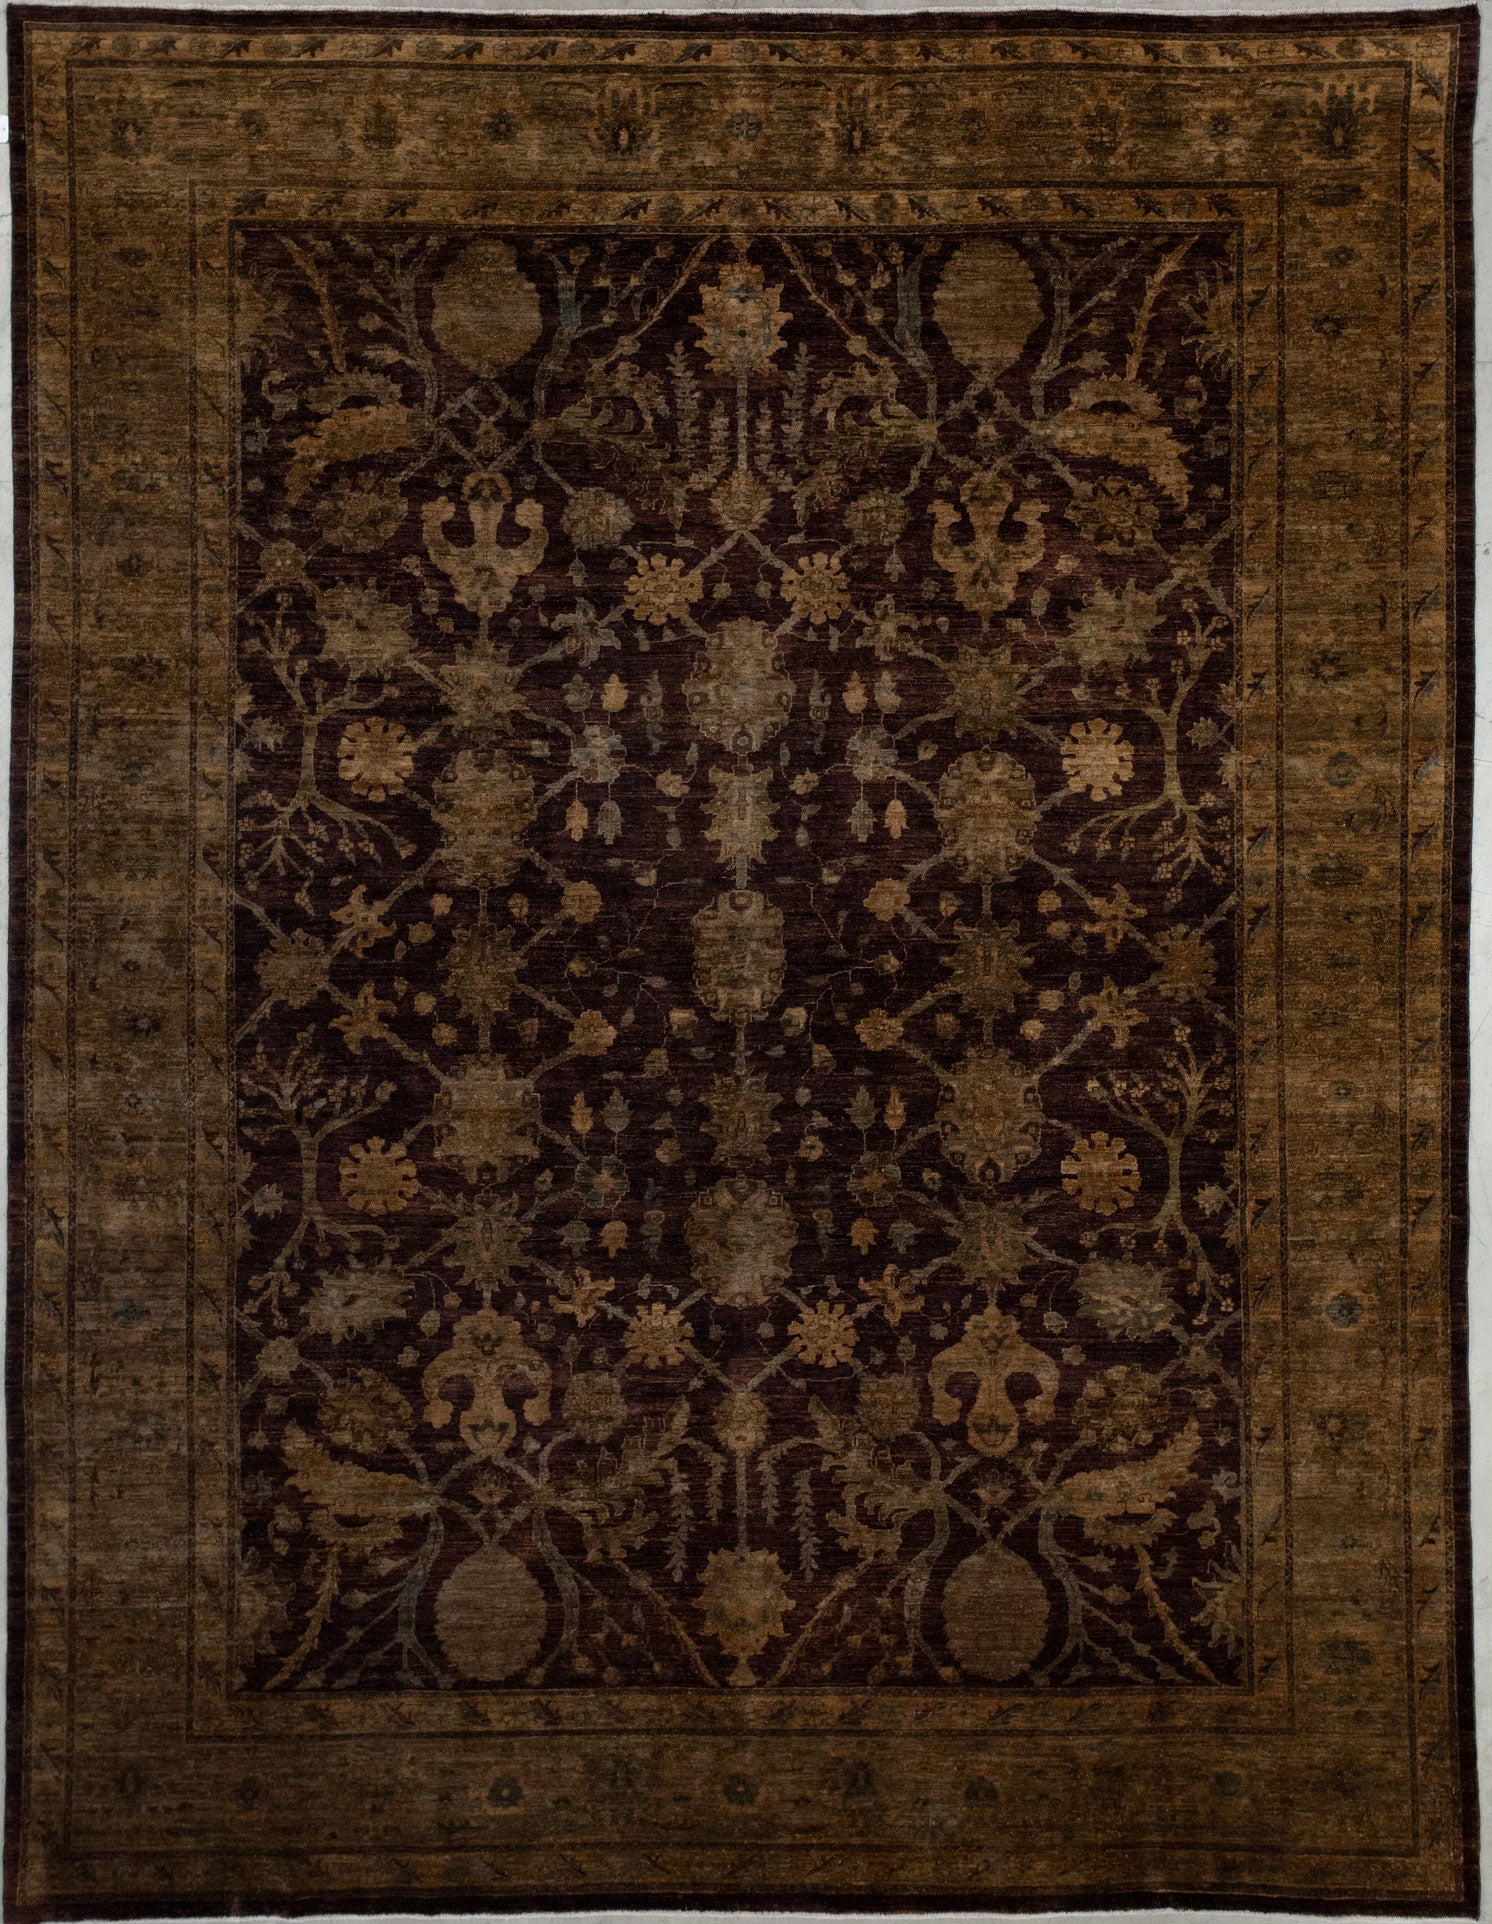 One of the finest rug was knitted in classic style.